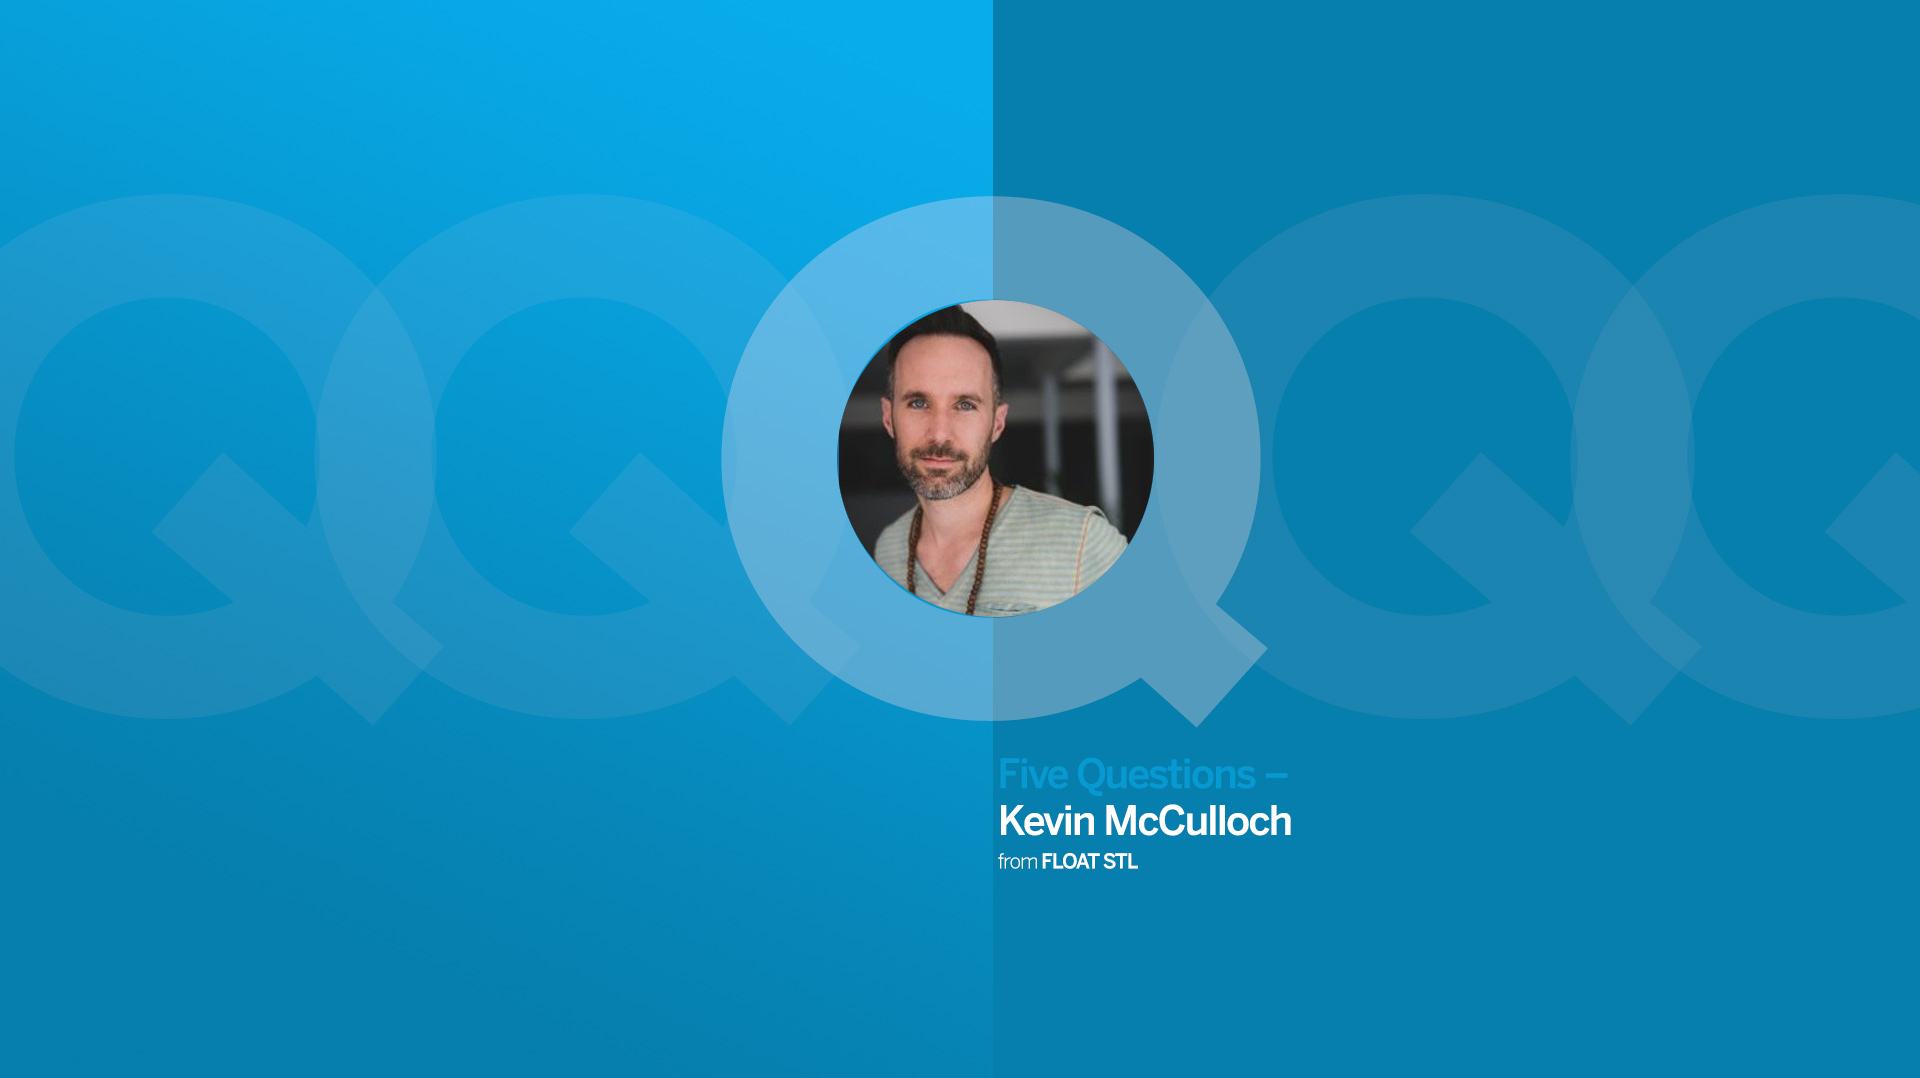 Kevin McCulloch from FLOAT STL - Five Questions